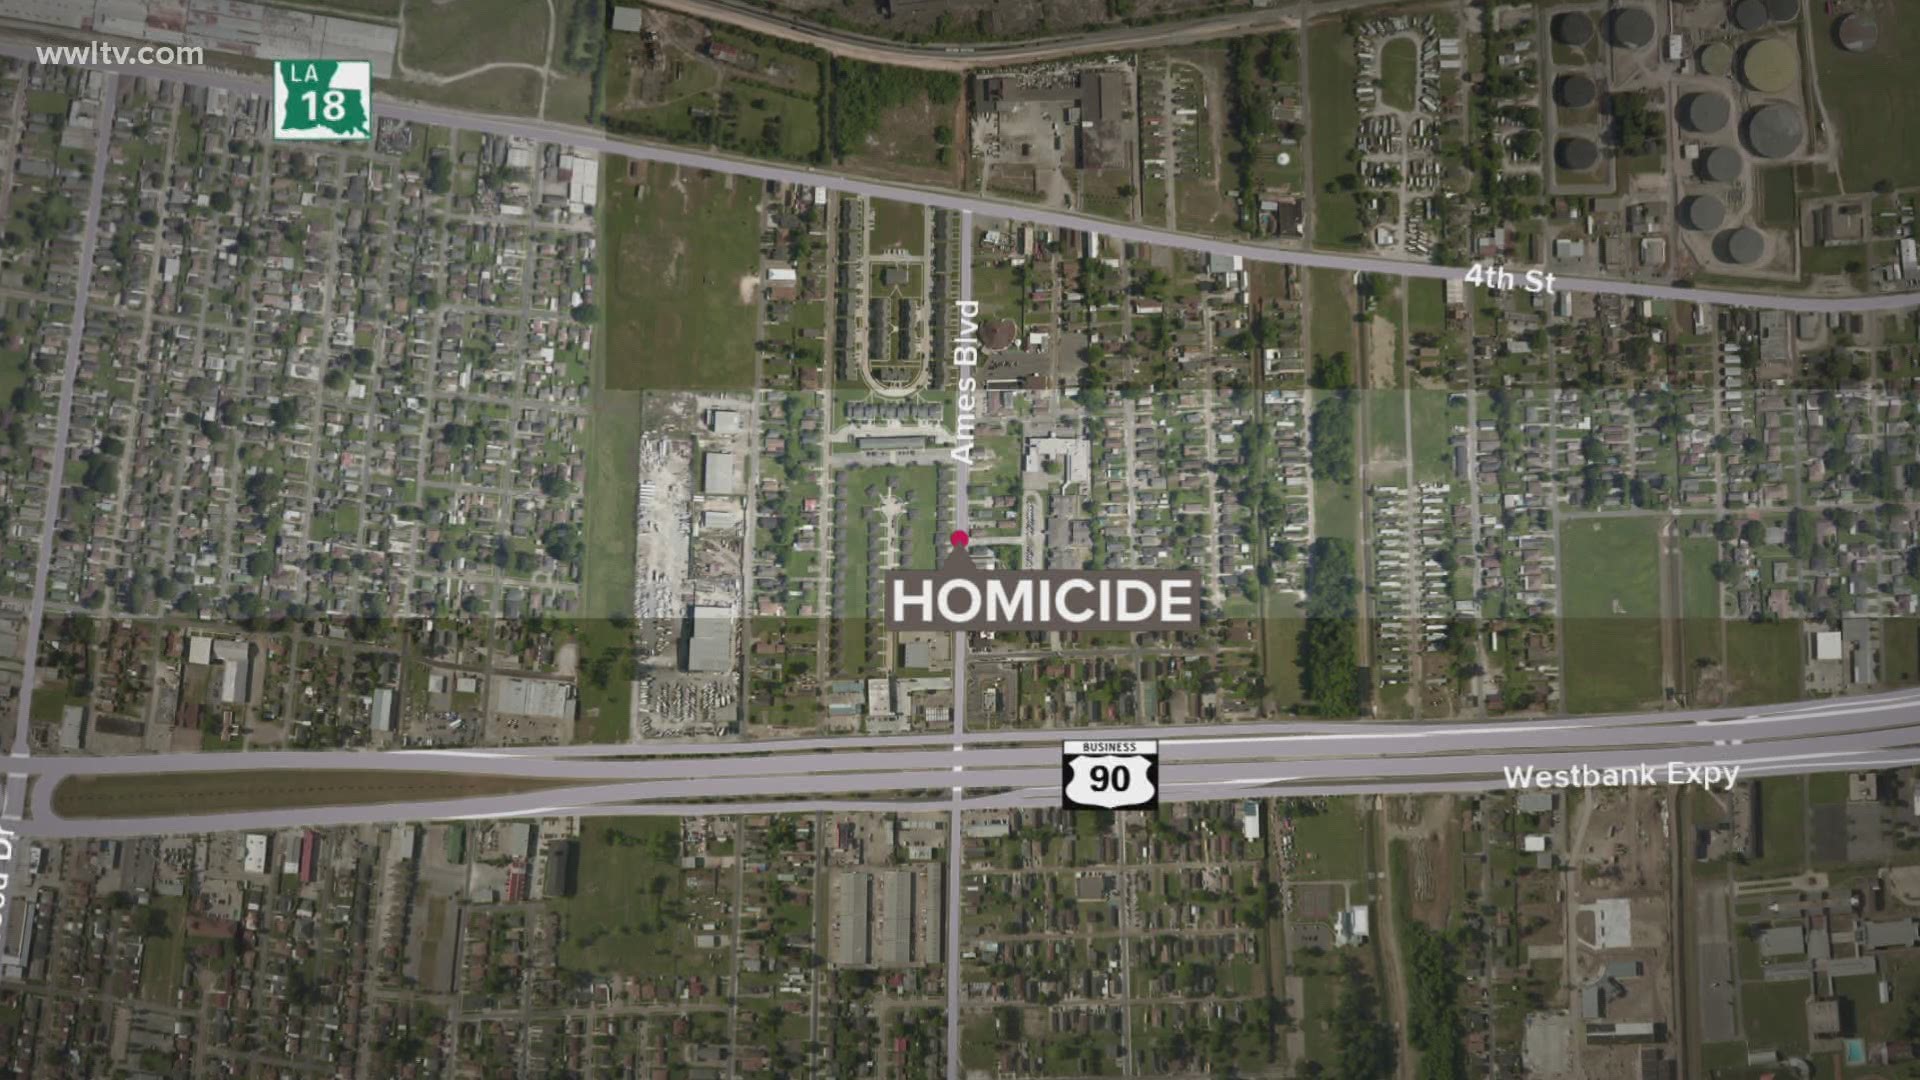 Police are looking in to the shooting death of a man in Marrero that also left a woman injured.